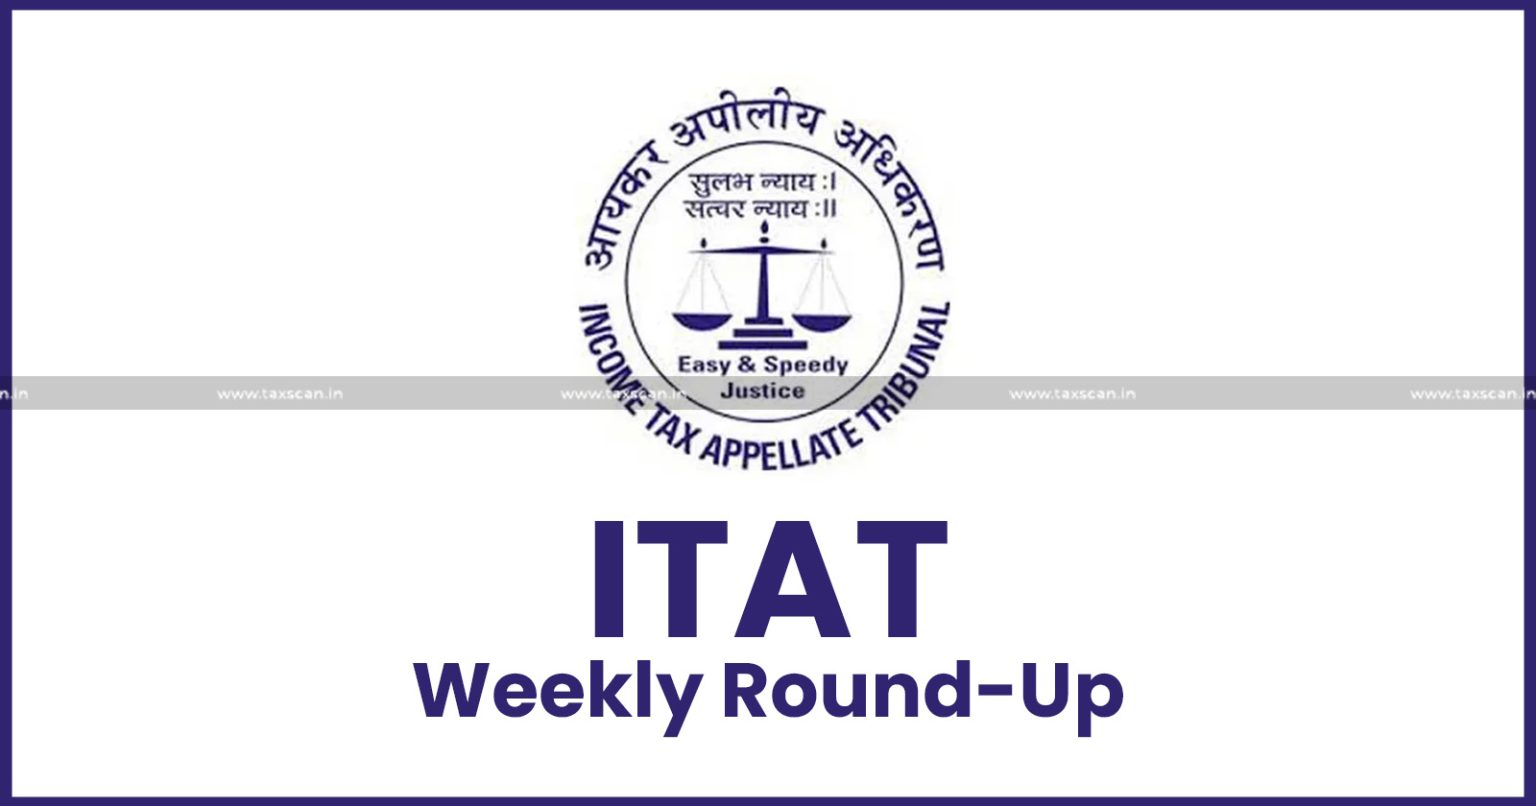 ITAT Weekly round up - Weekly round up - Income Tax Weekly round up - ITAT Weekly news - TAXSCAN